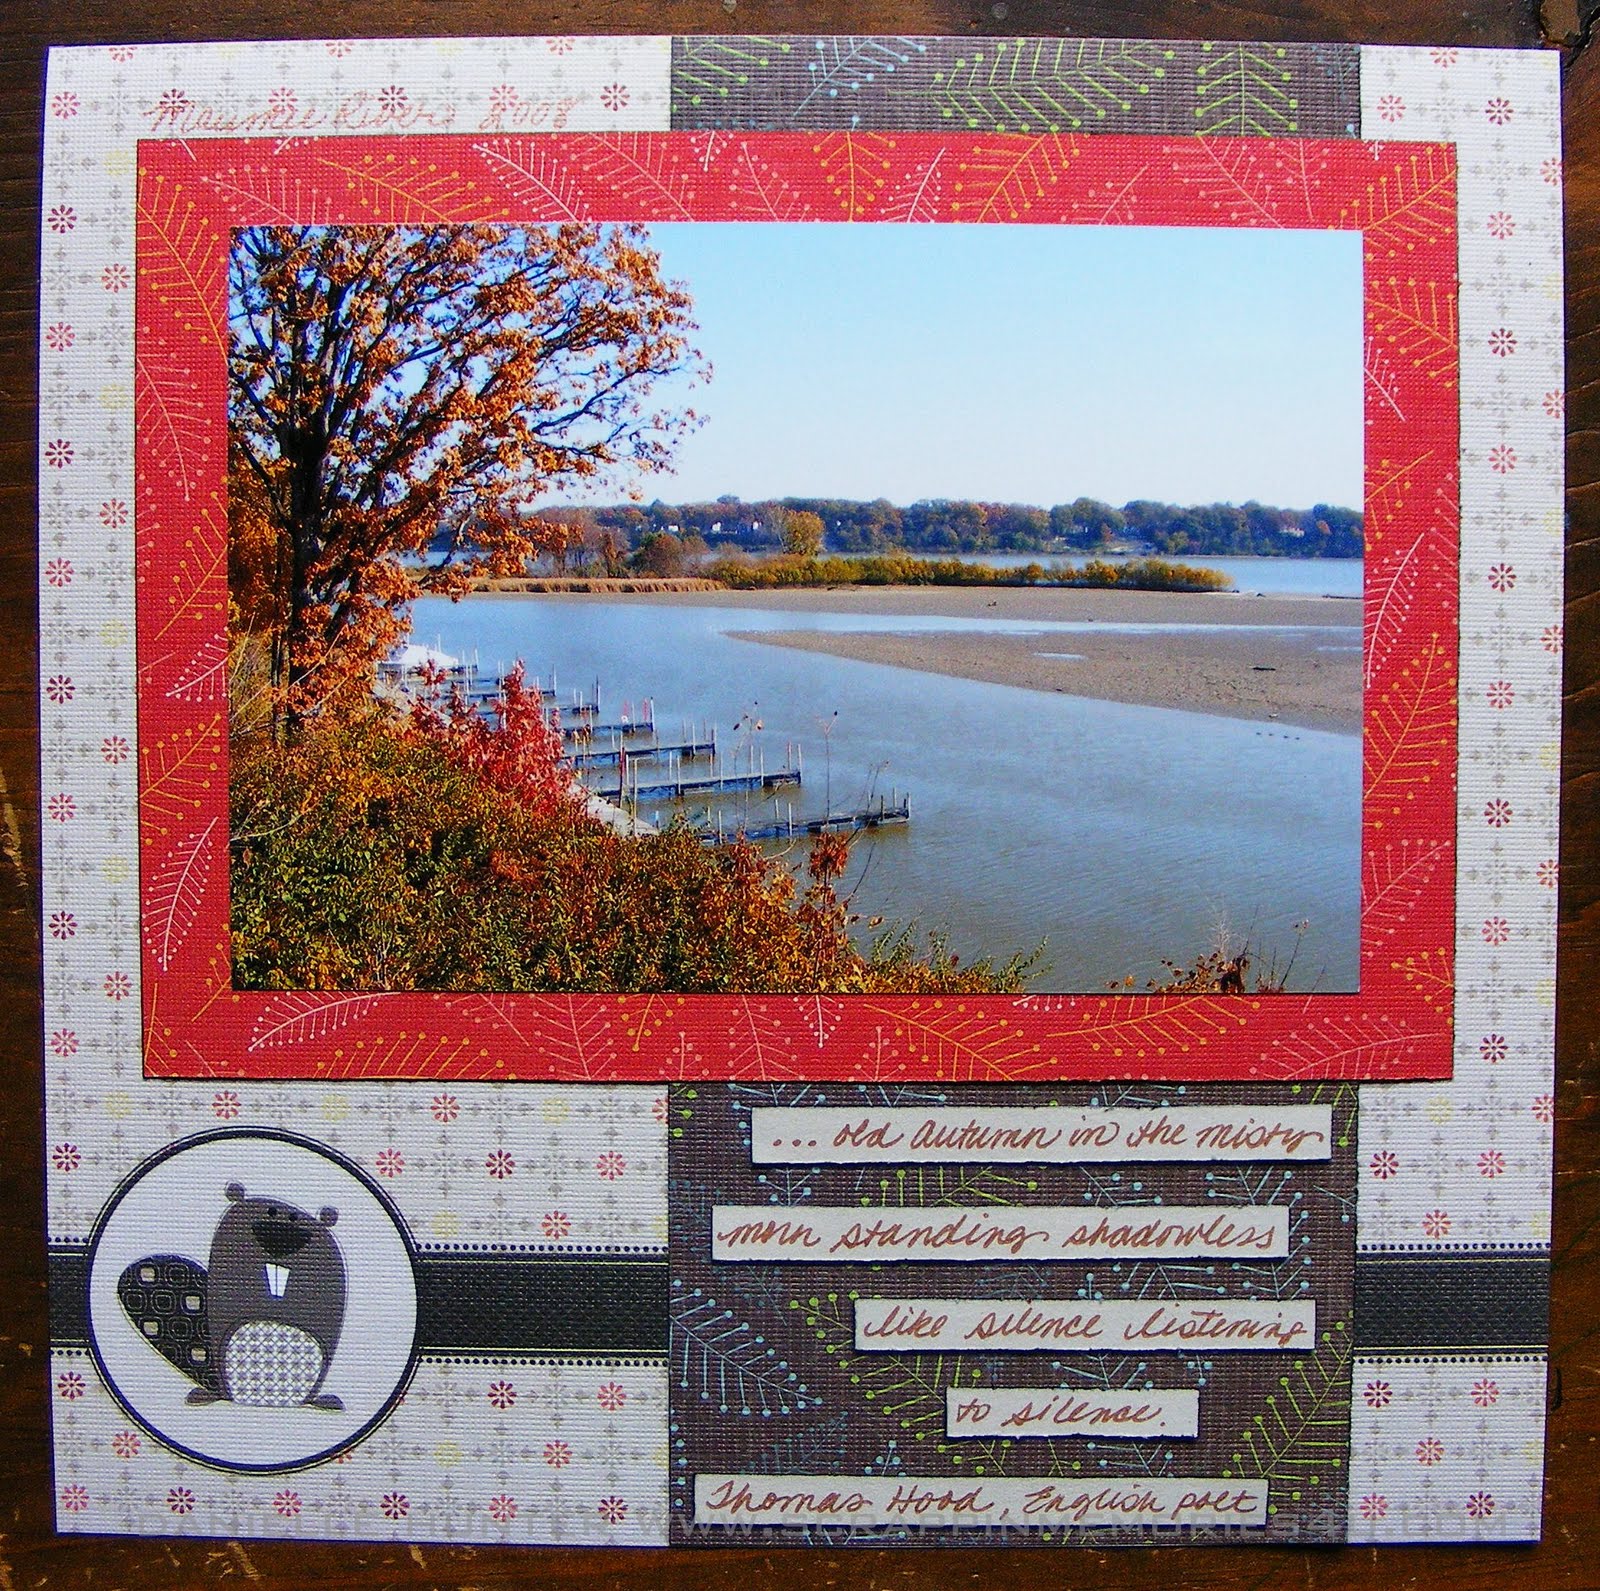 Scrapbooking Quotes and Sayings for Your Layouts